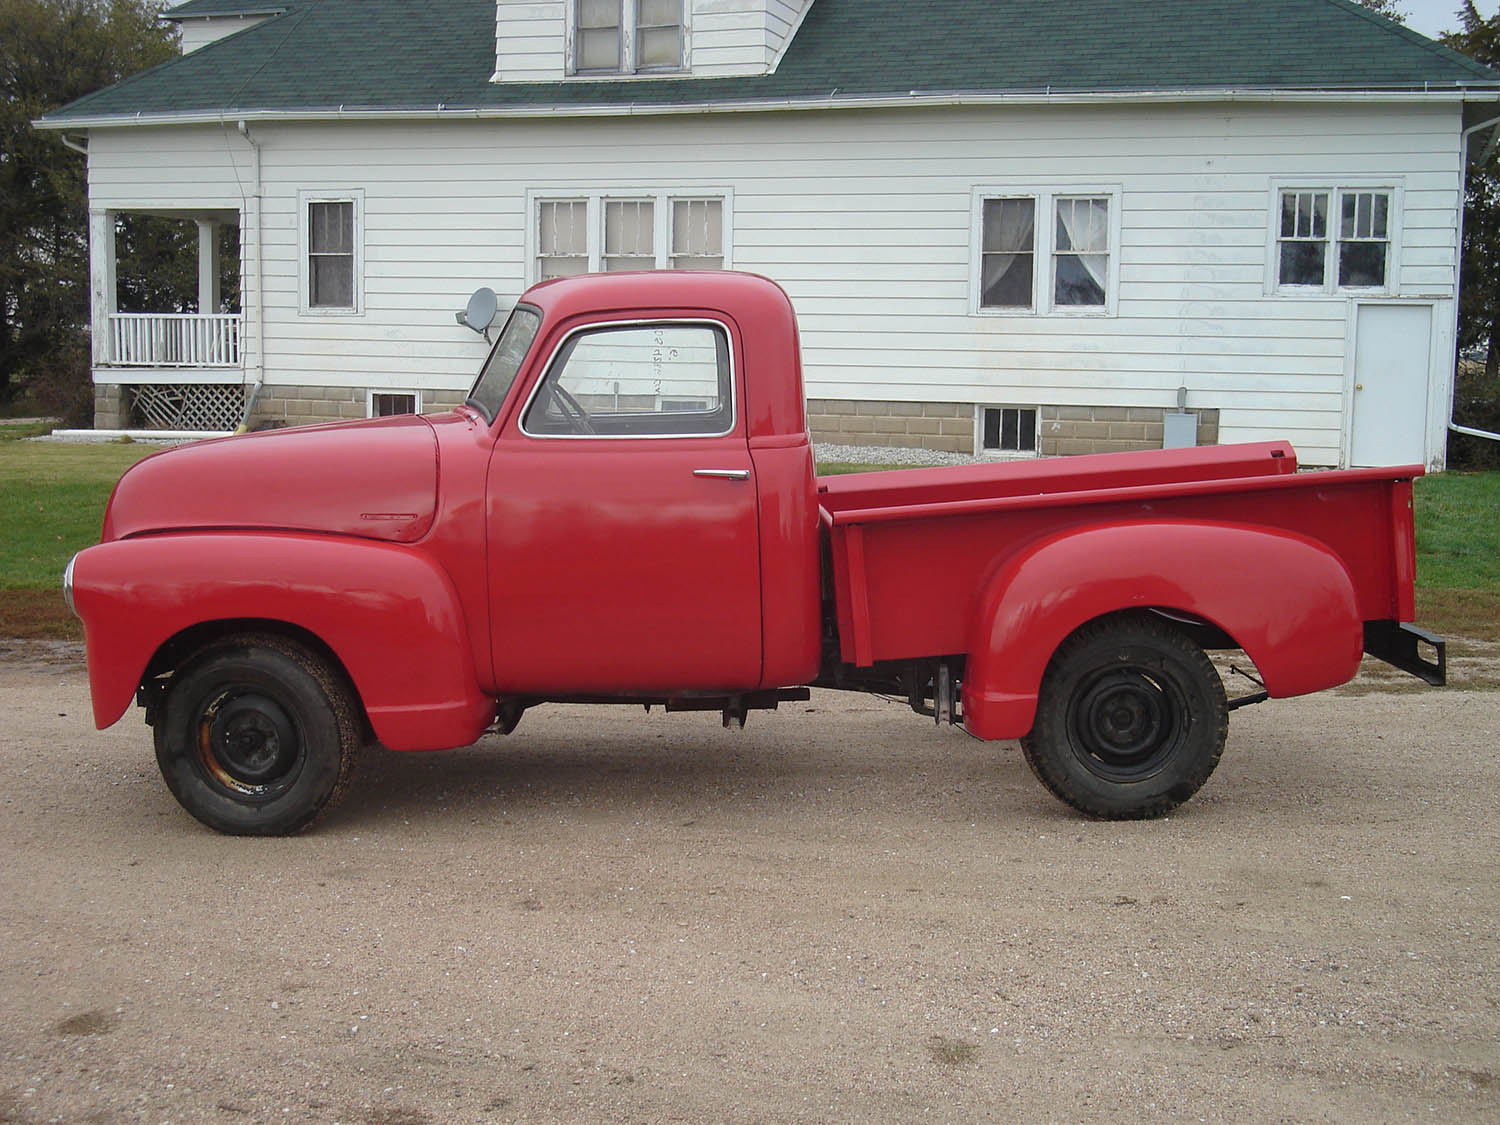 Al's Red Truck Before Image #2